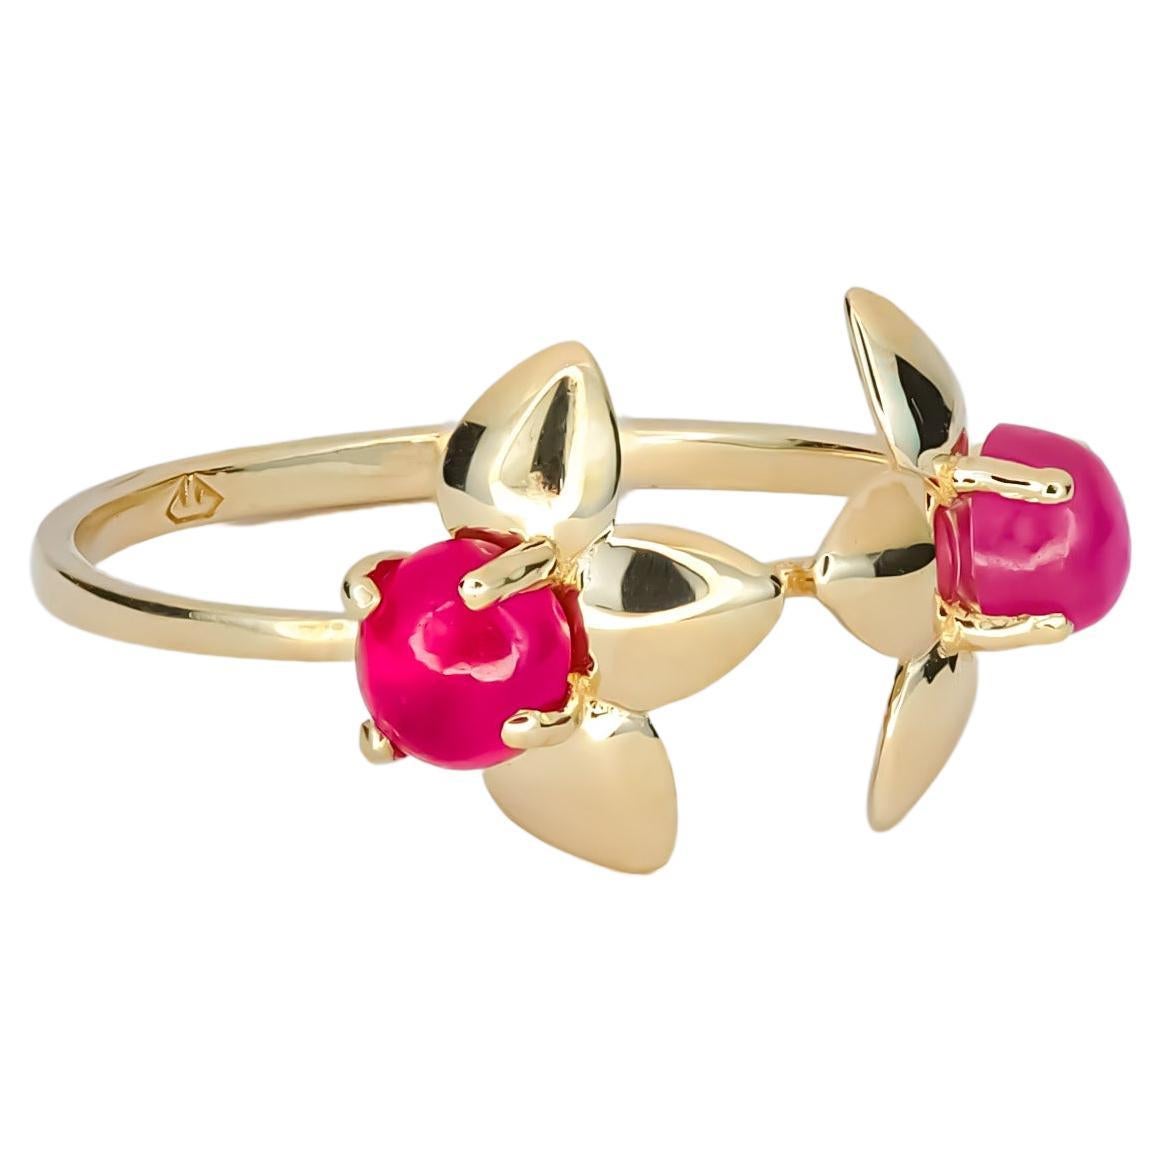 14 Karat Gold Ring with 2 Rubies, Flower Gold Ring. July birthstone ruby ring